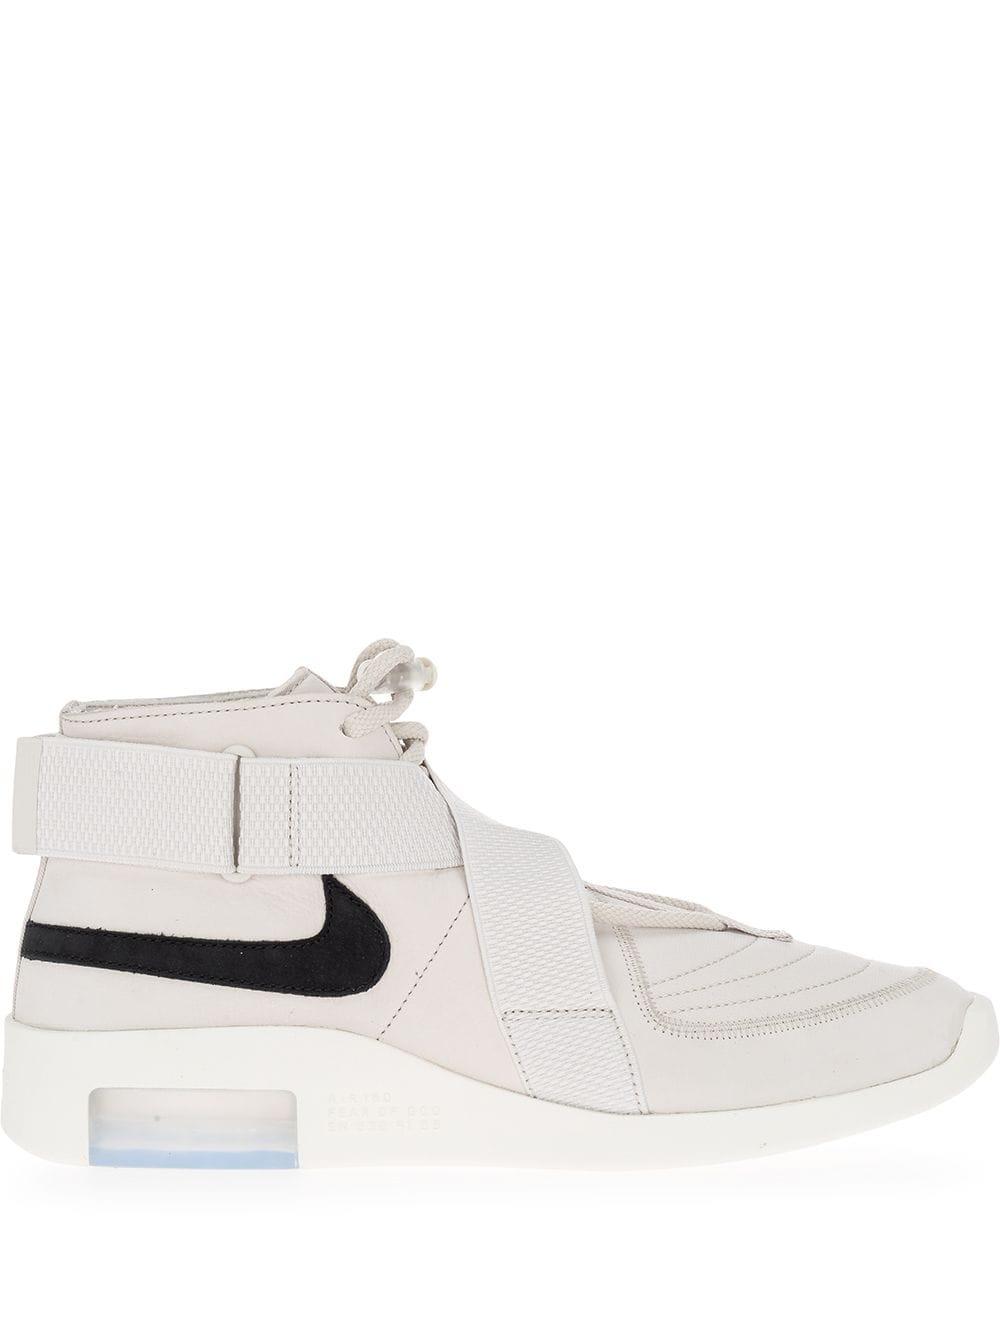 buy \u003e white nikes with strap, Up to 63% OFF